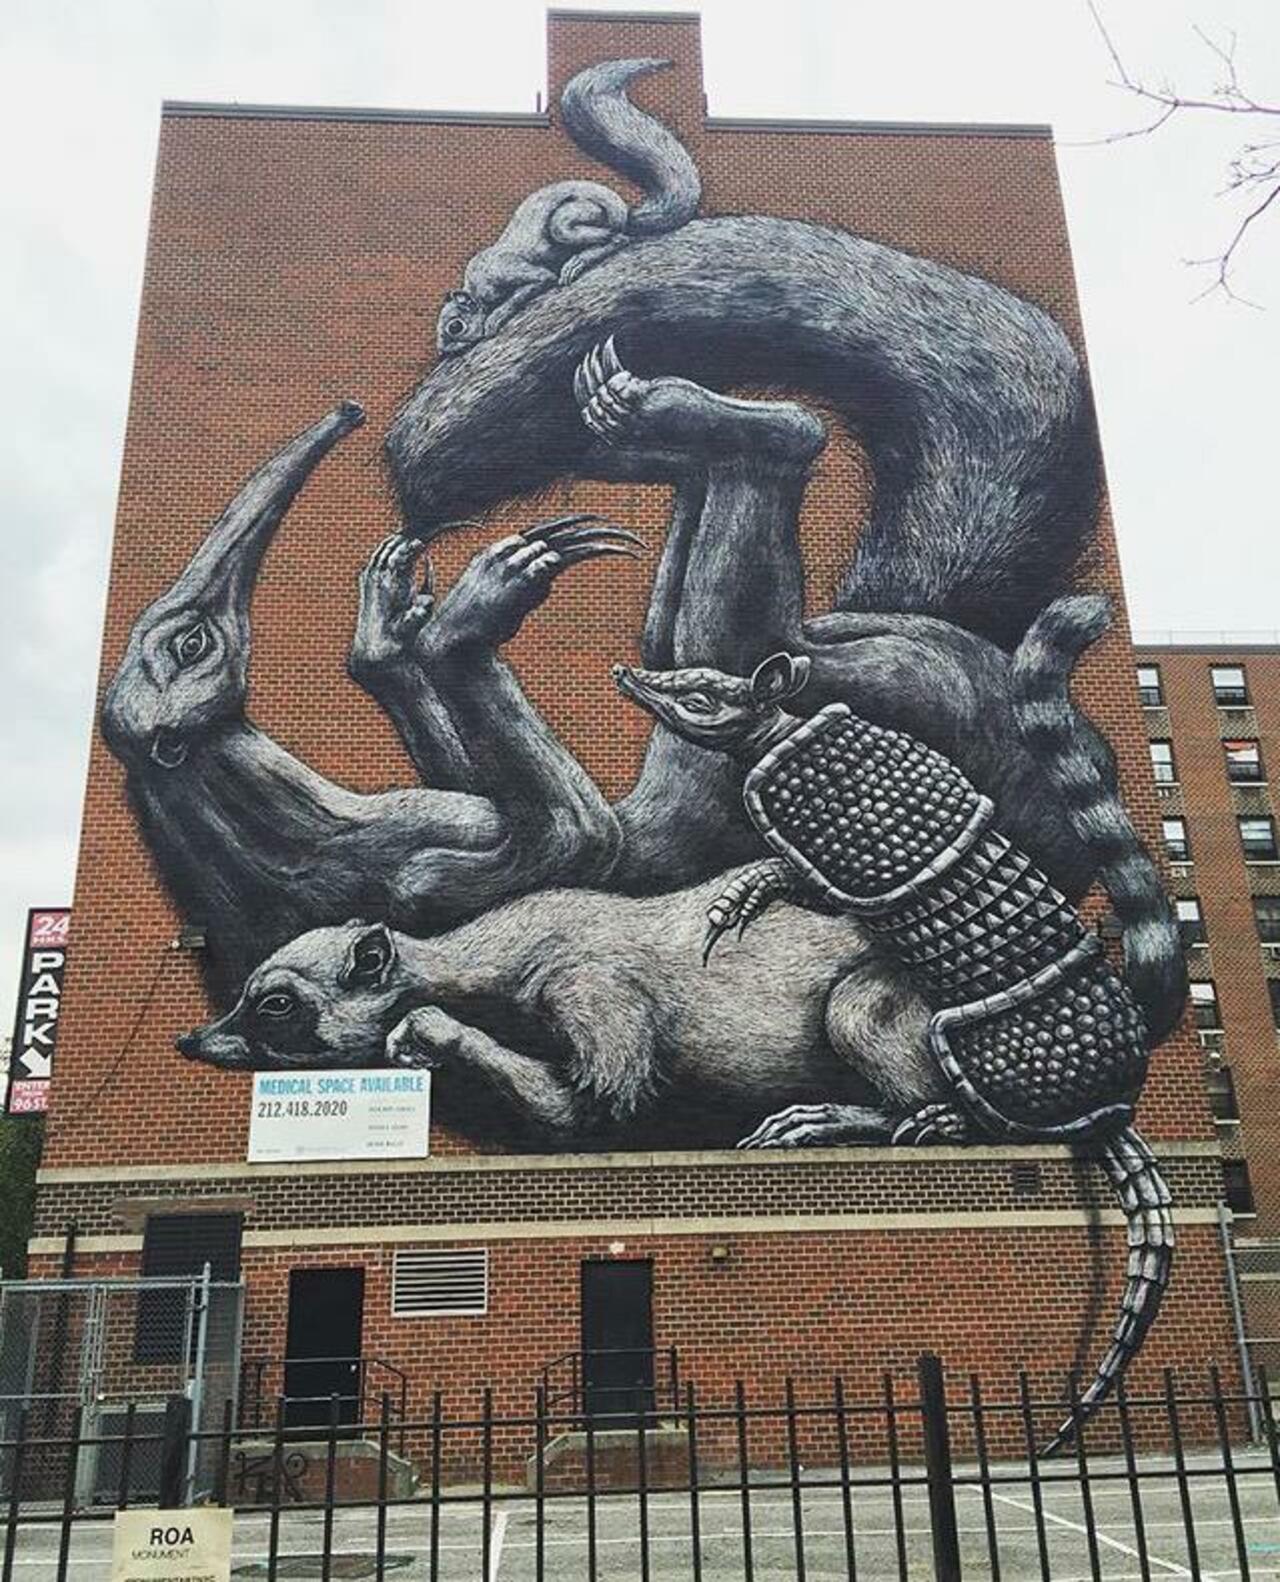 The completed new large scale Street Art wall by ROA in NYC

#art #graffiti #mural #streetart http://t.co/1EVn5grwyt